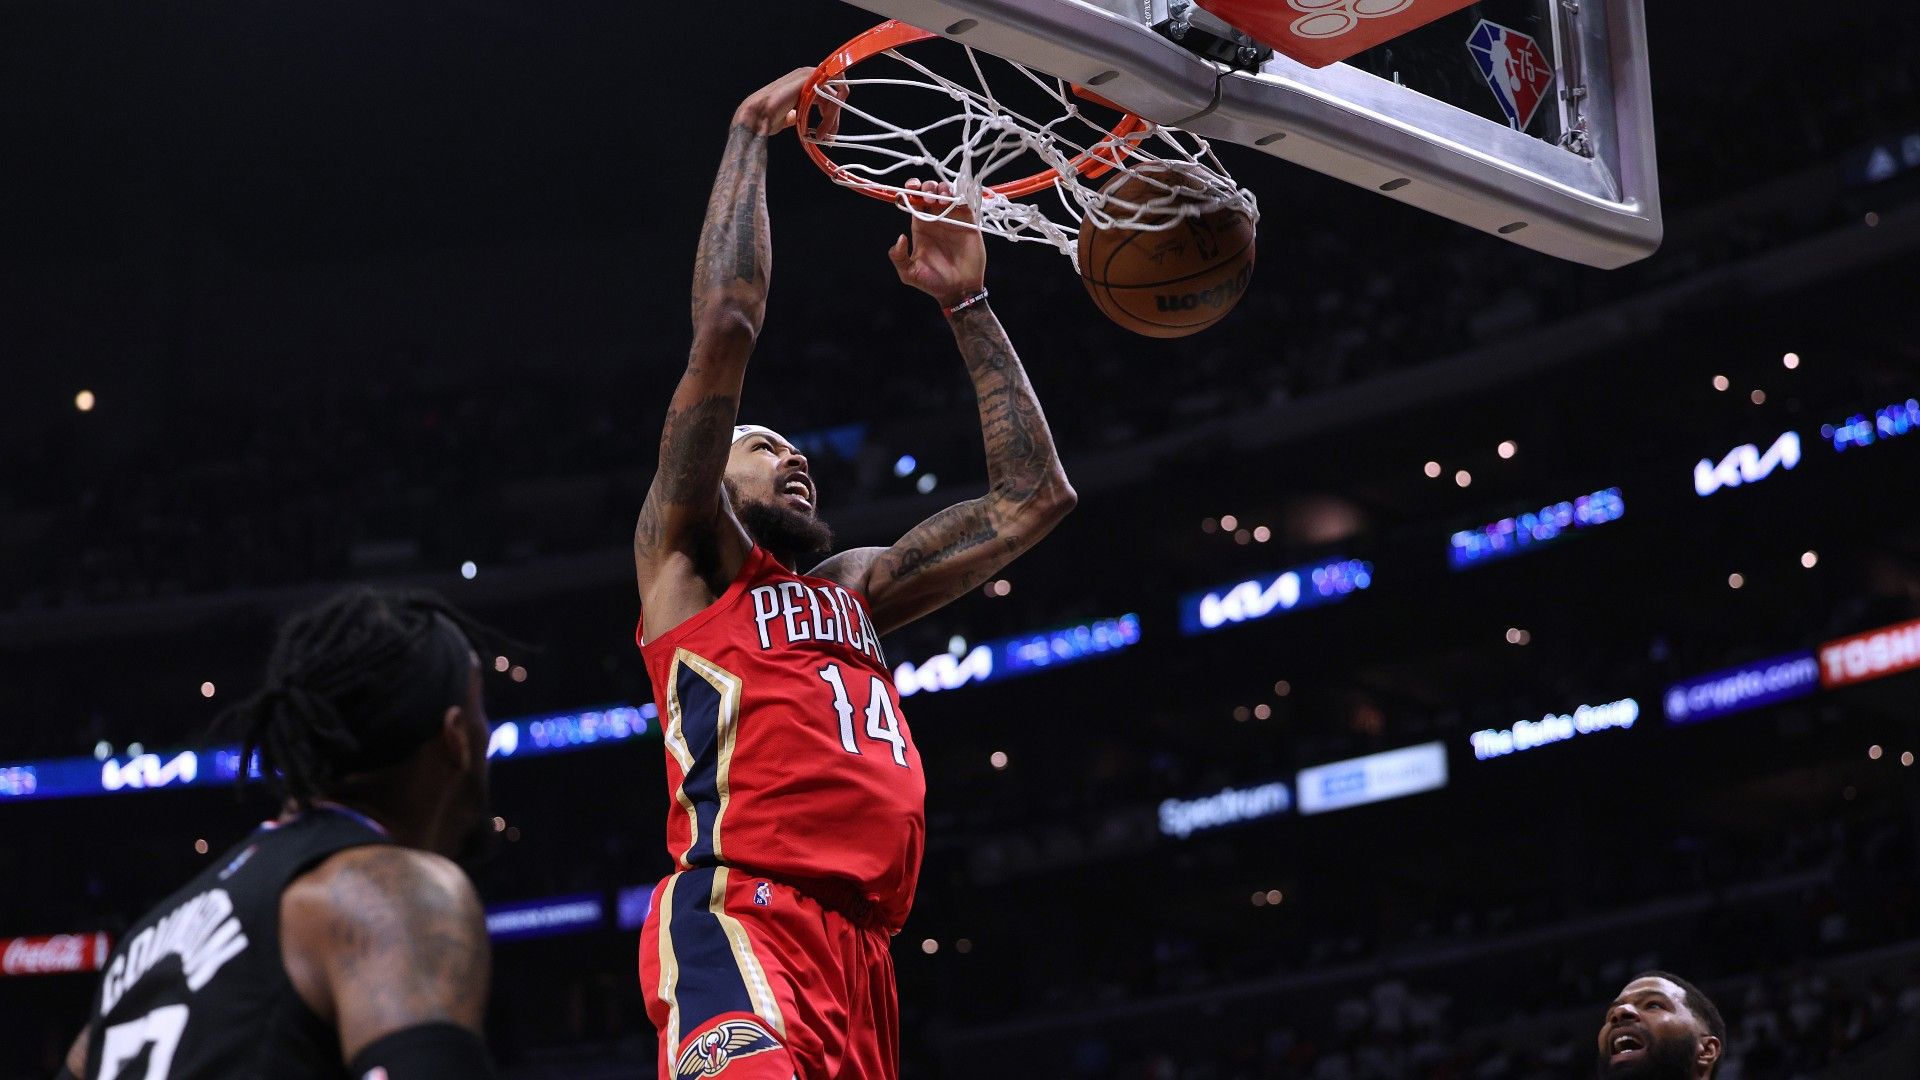 Pelicans earn 105-101 win over Clippers, claim No.8 seed